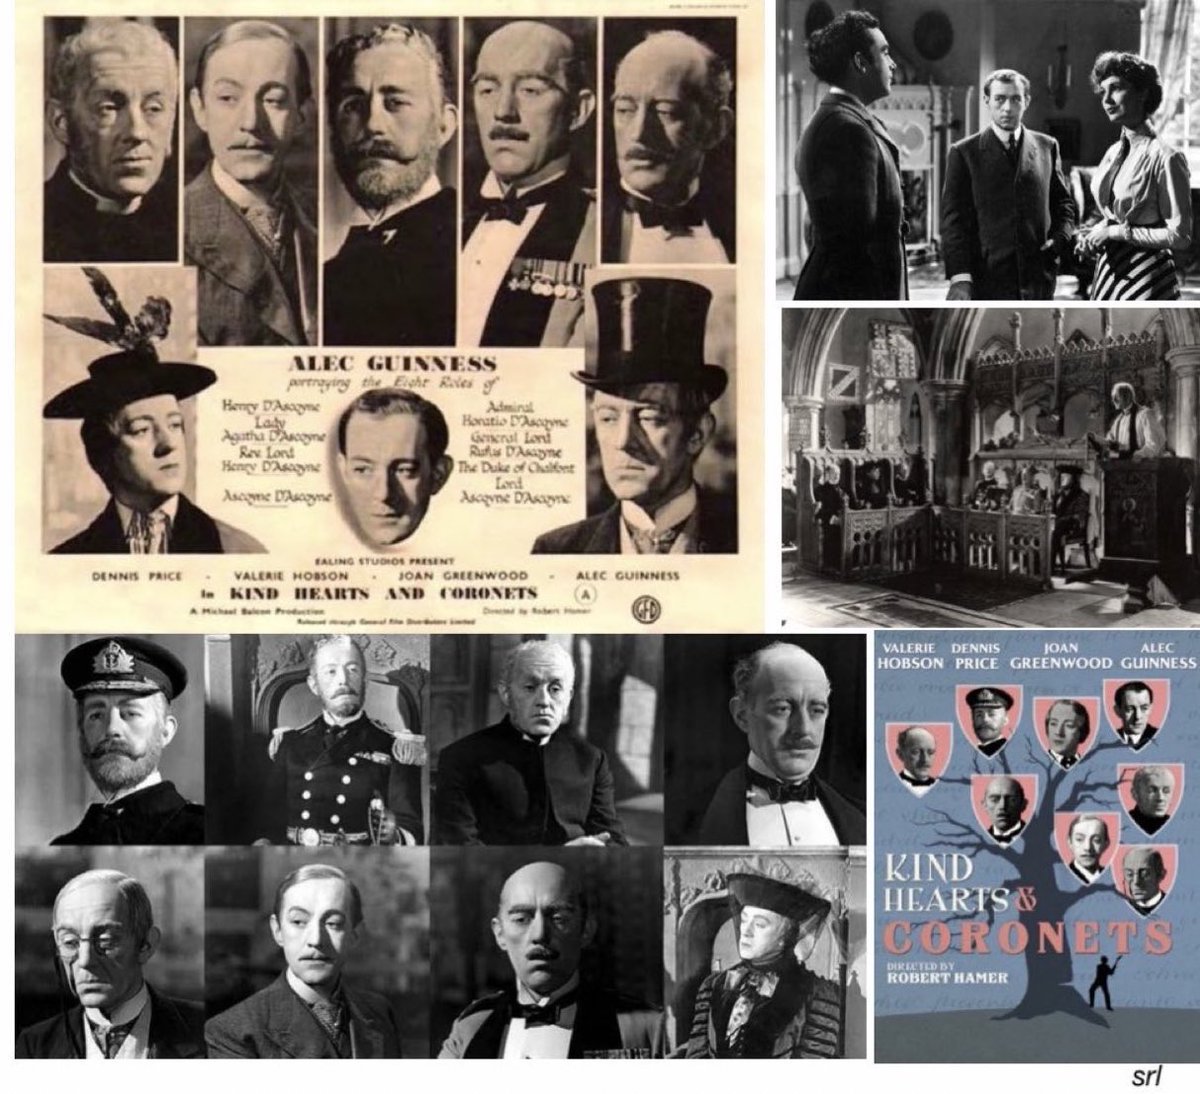 11am TODAY on @Film4      👉joint #TVFilmOfTheDay

The 1949 film🎥 “Kind Hearts and Coronets” directed by #RobertHamer & co-written with #JohnDighton

It’s loosely based on #RoyHorniman’s 1907 novel📖 “Israel Rank: The Autobiography of a Criminal”

🌟#AlecGuinness #DennisPrice